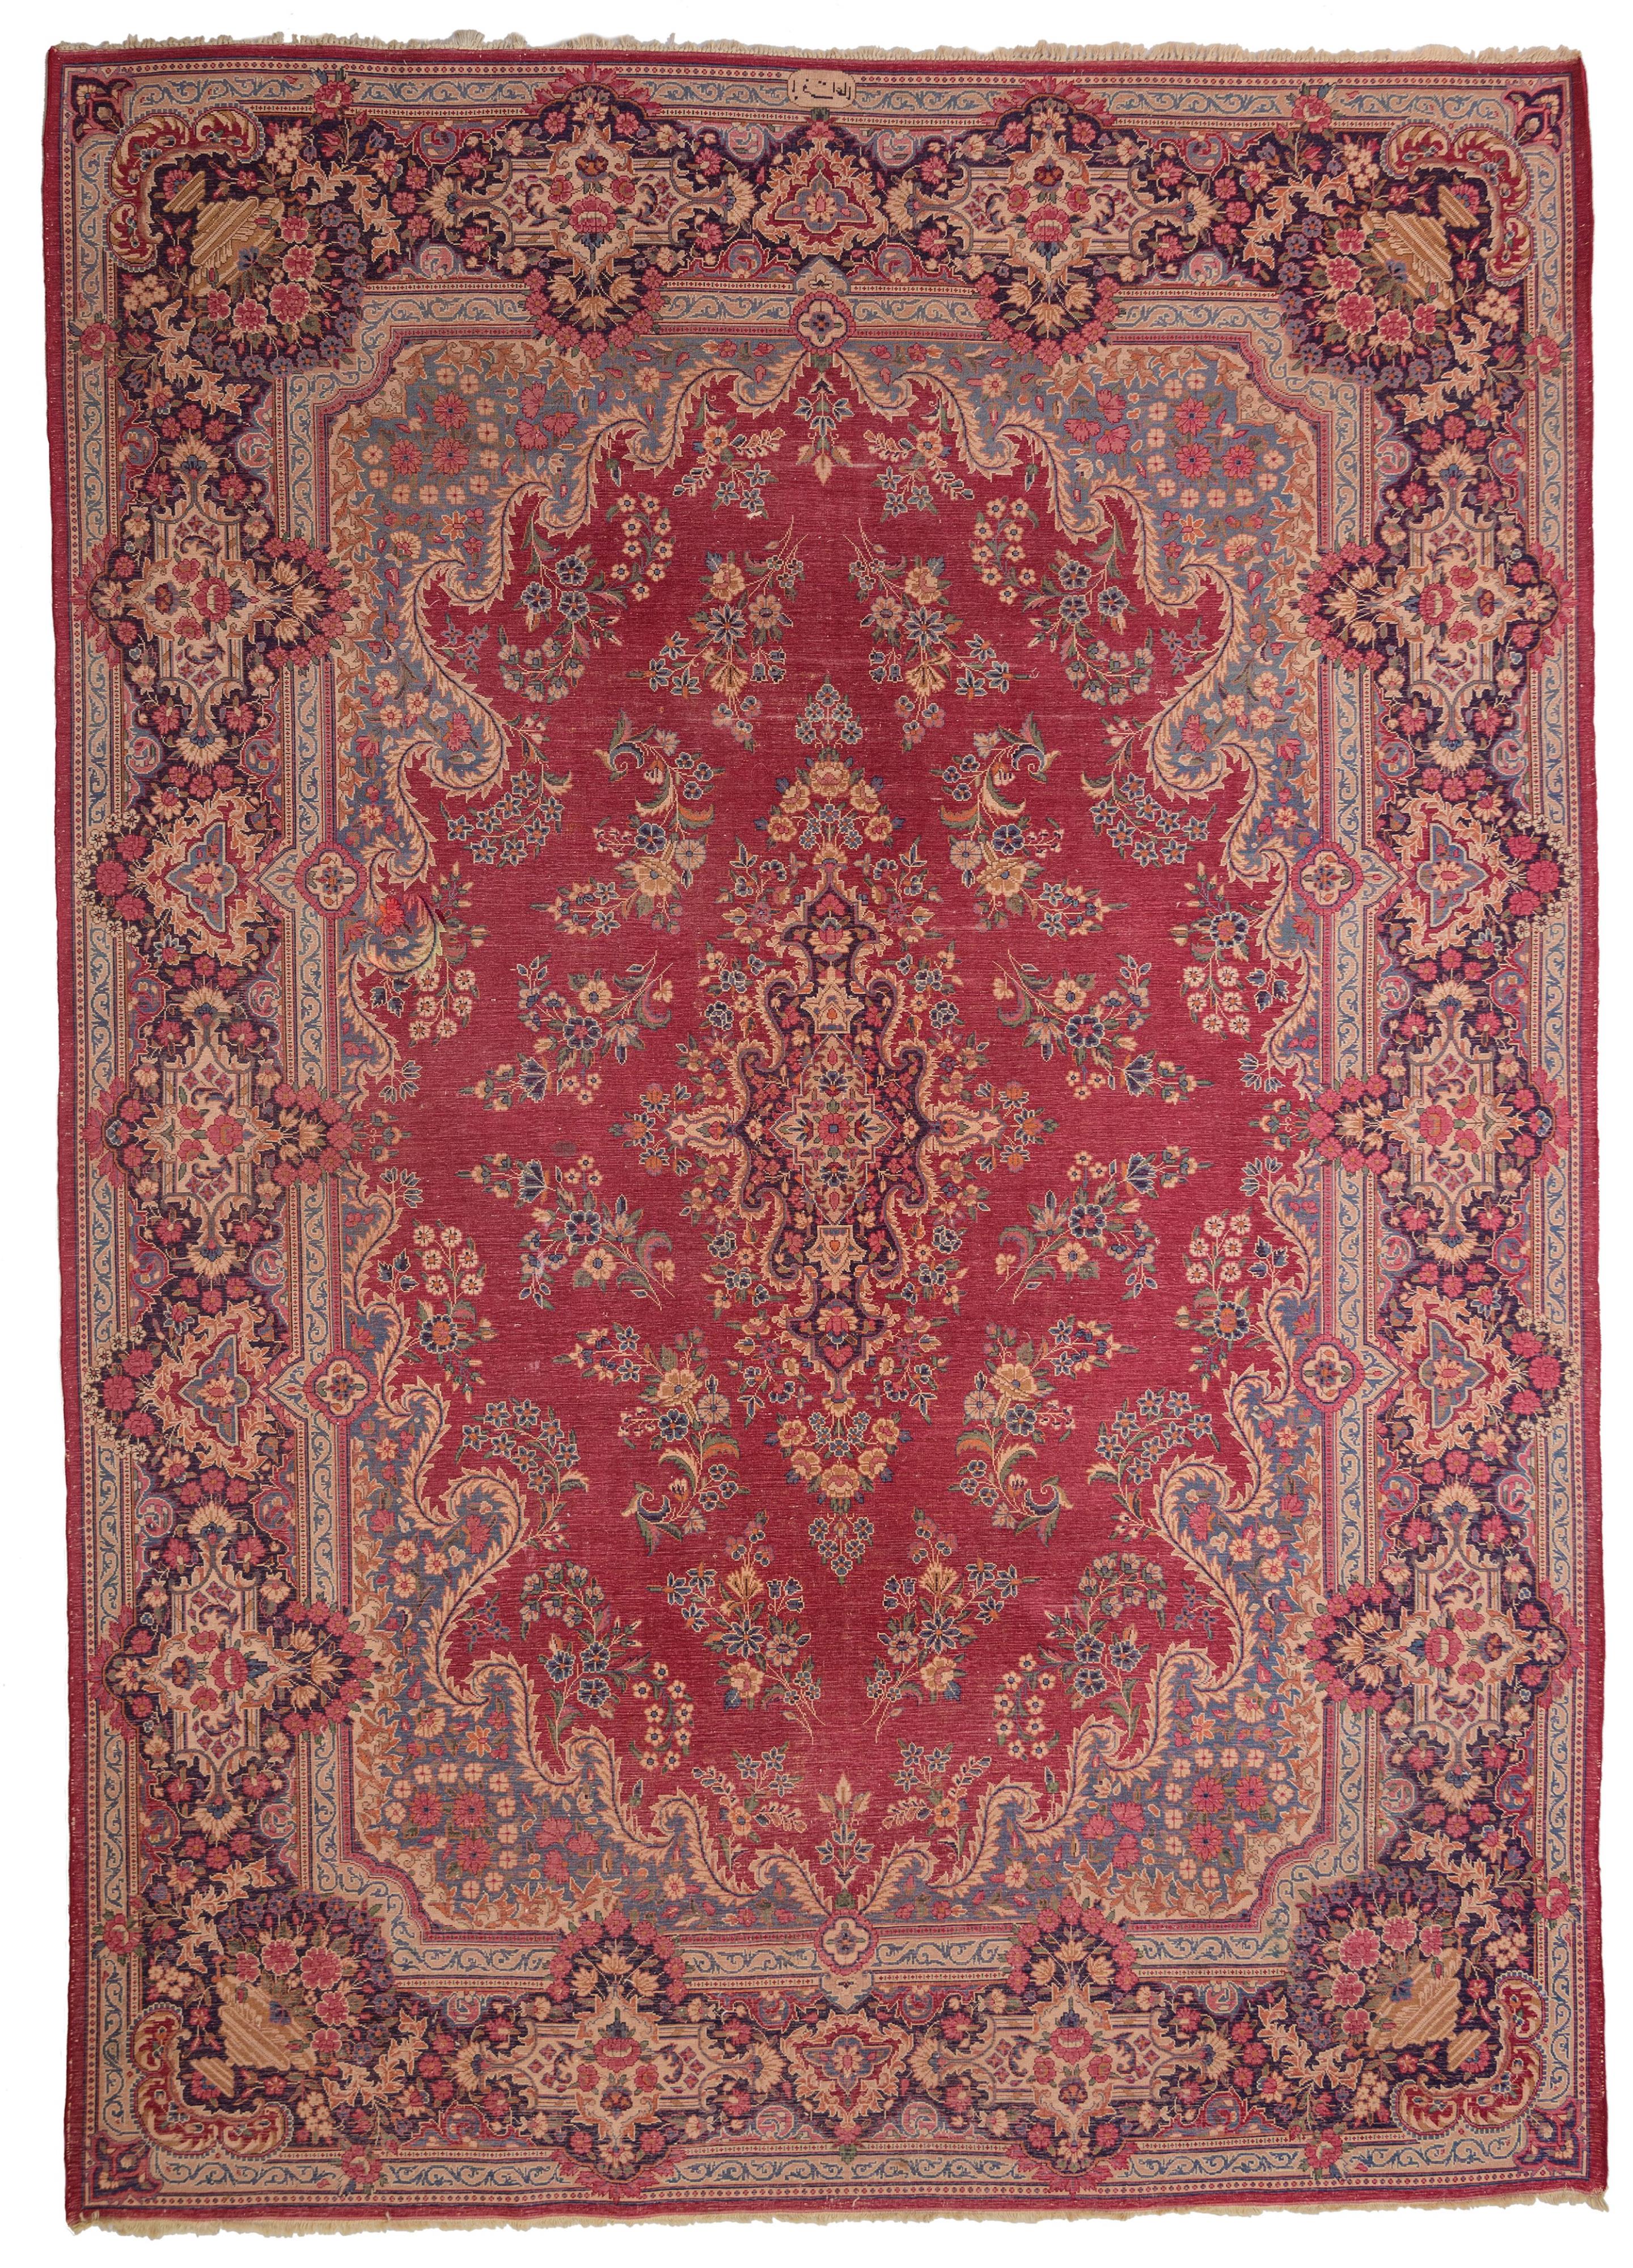 A large Oriental woollen rug, floral decorated, signed, 360 x 260 cm - Image 2 of 9